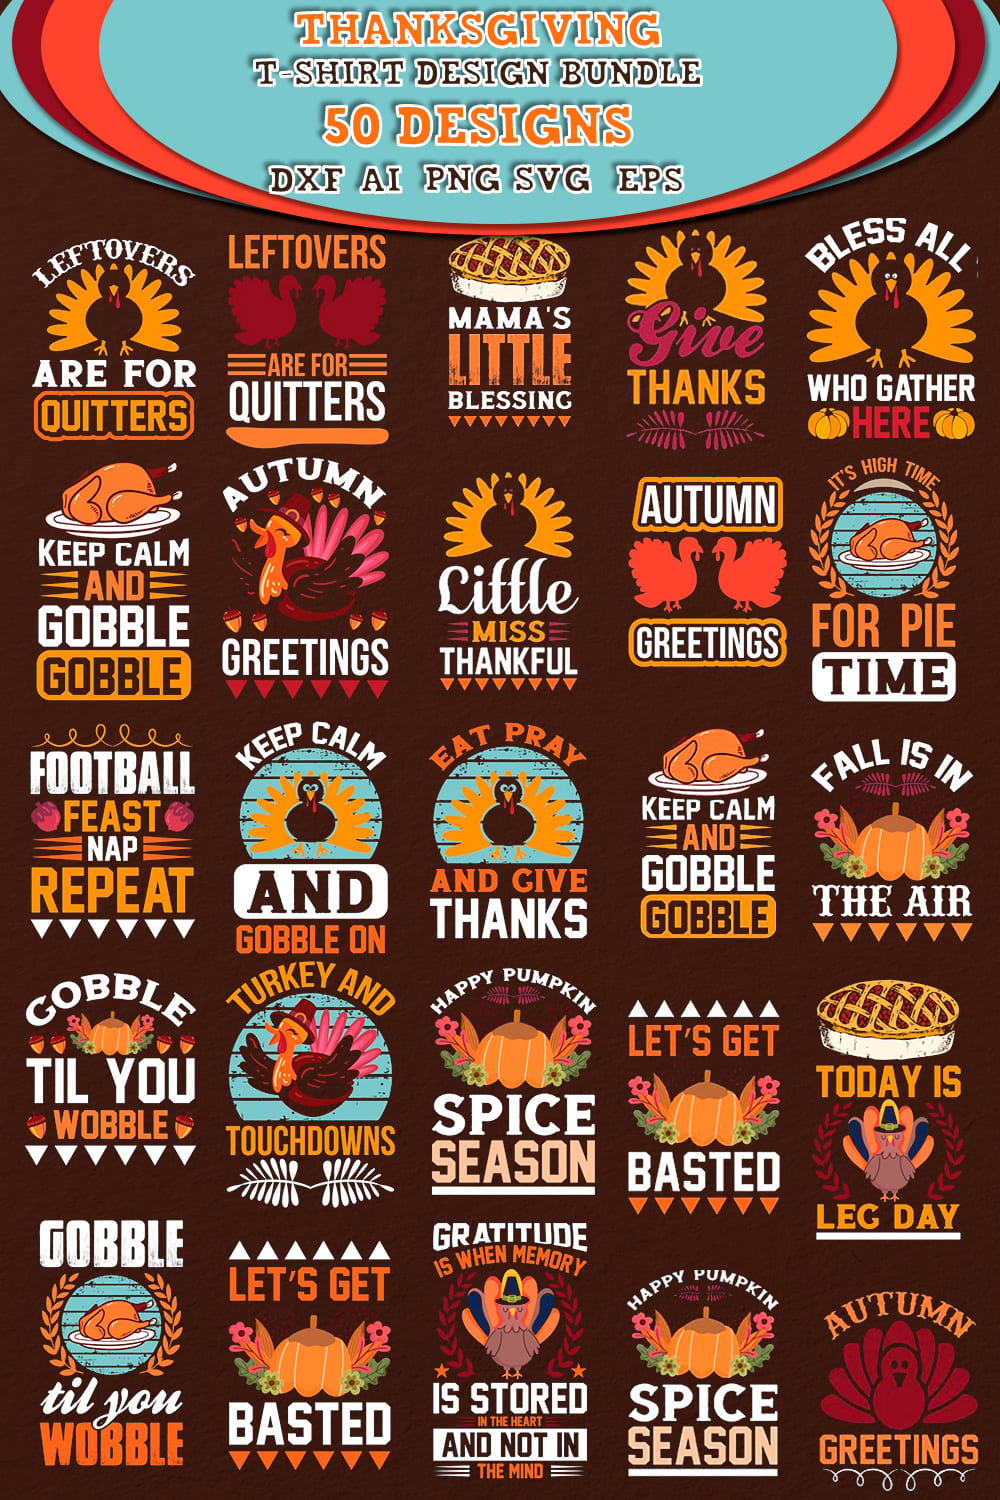 A set of gorgeous Thanksgiving themed images.